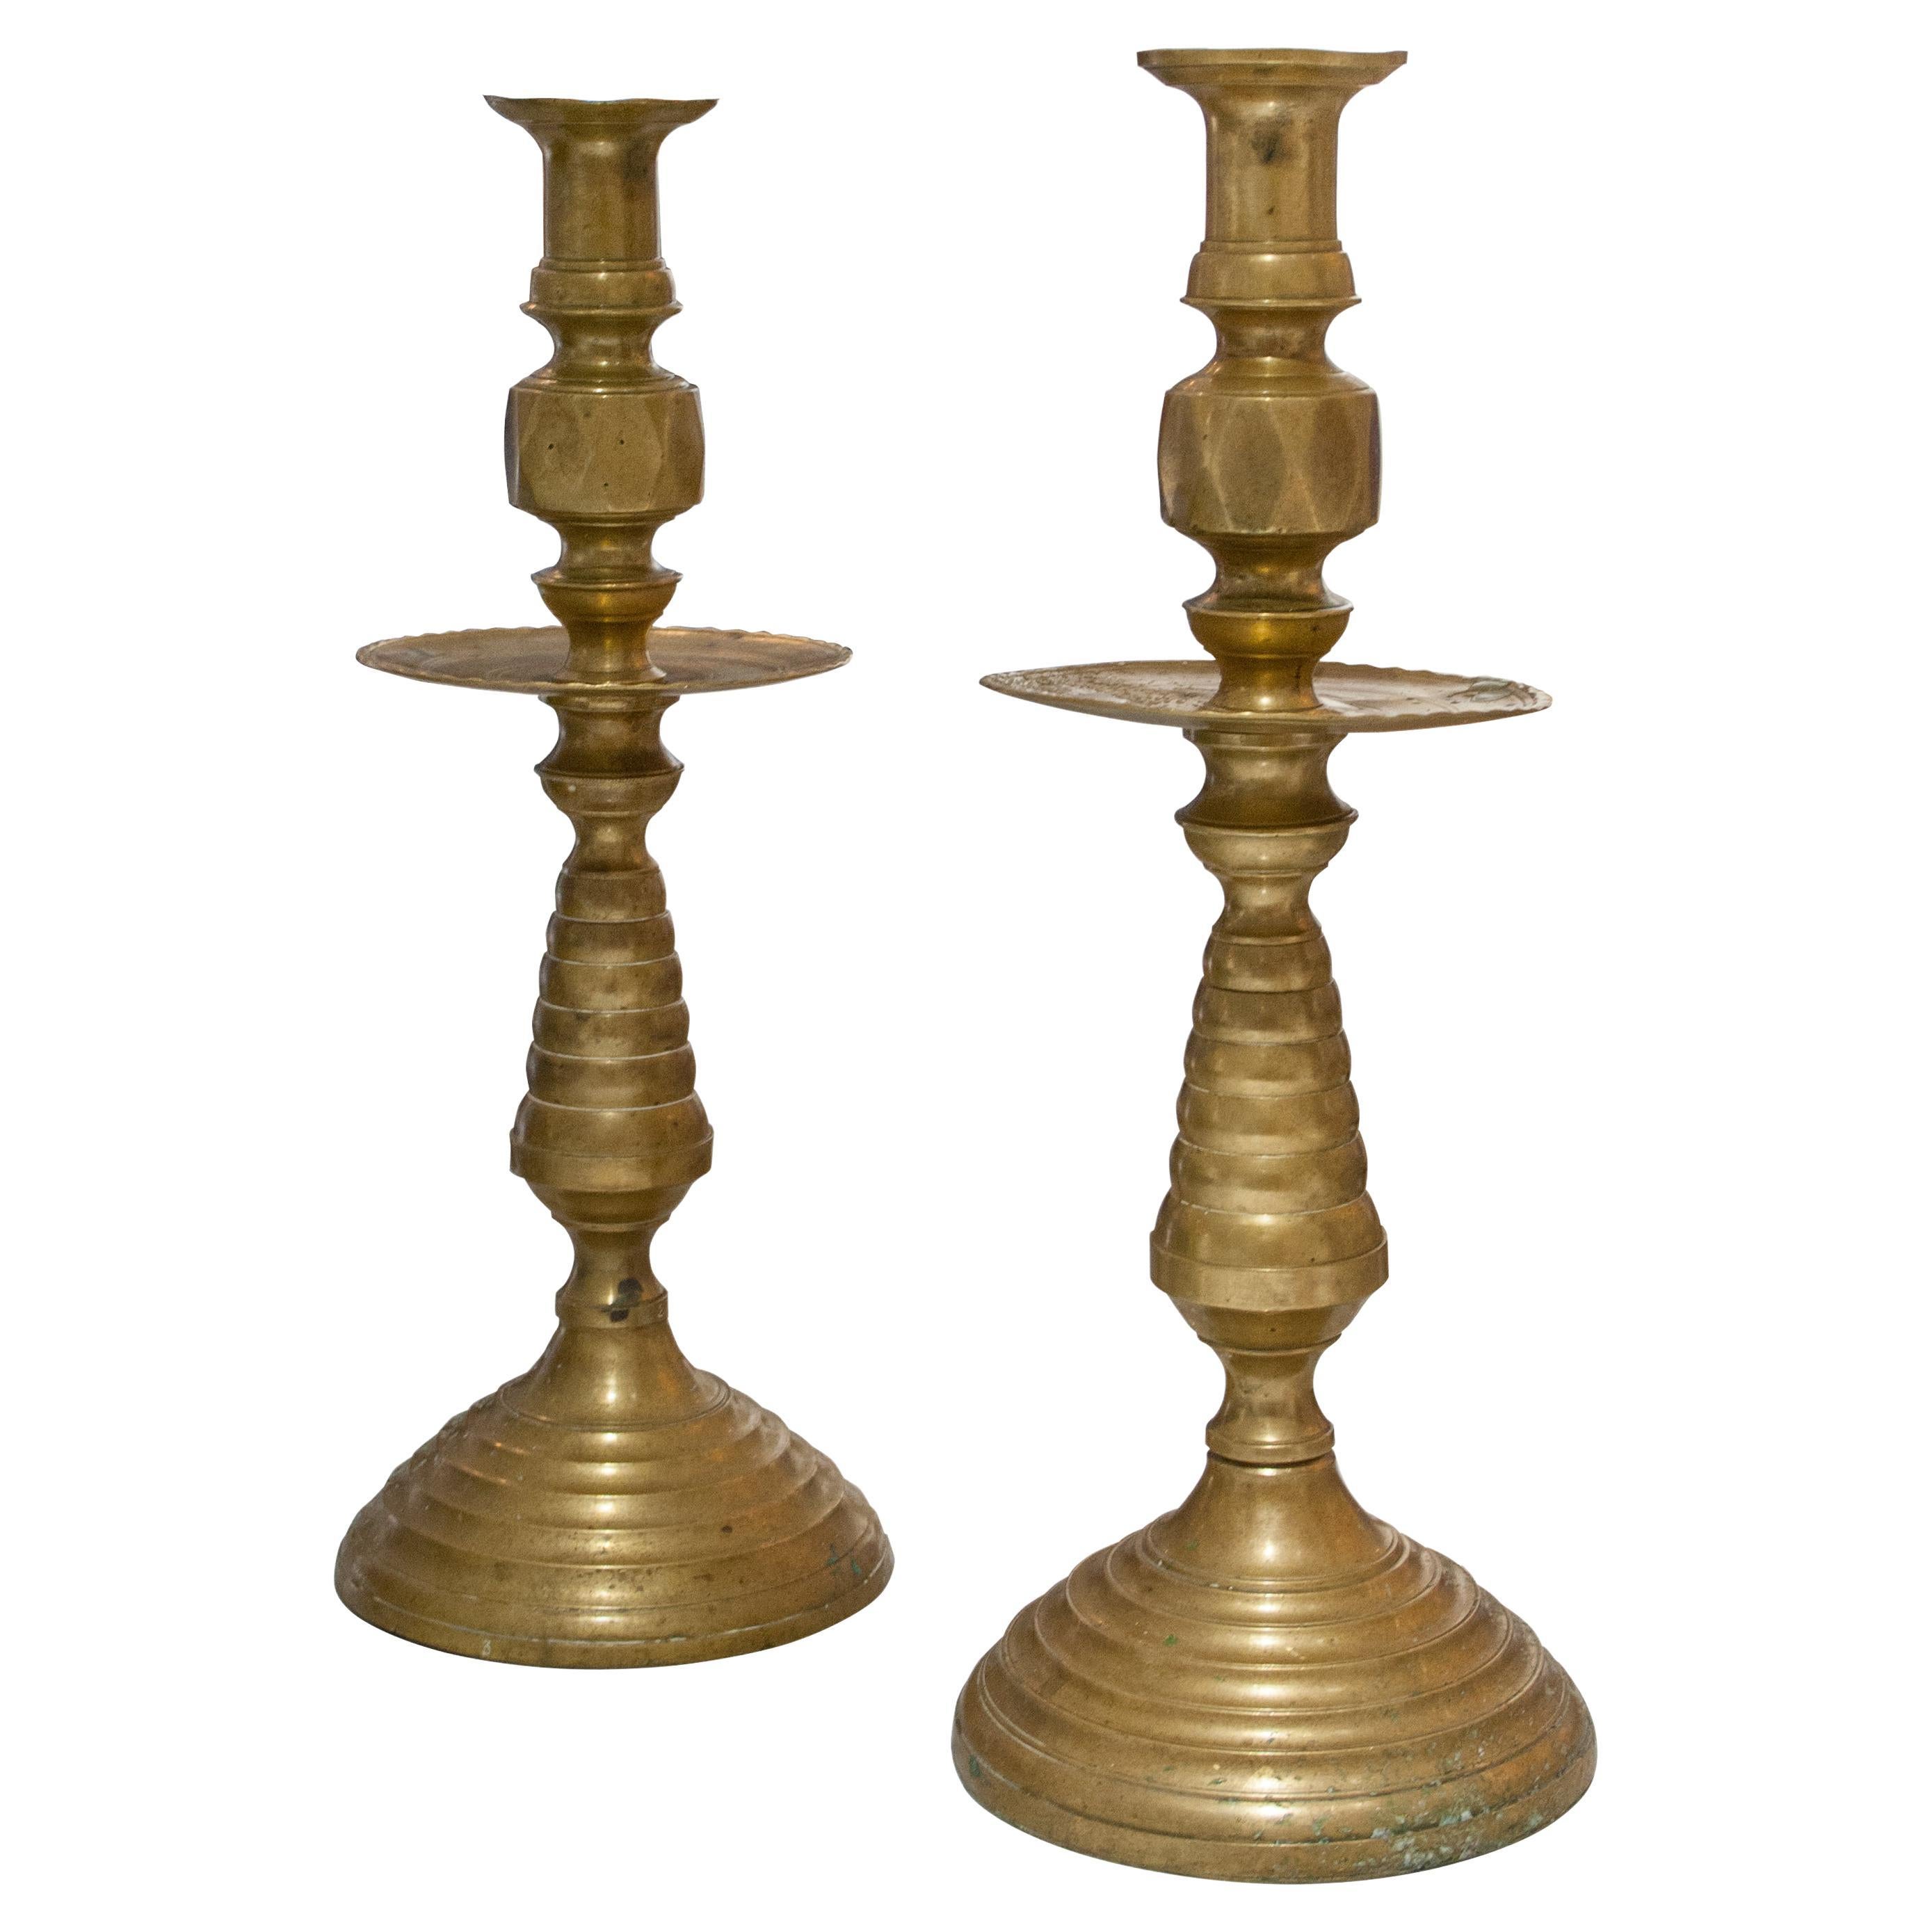 Church Candle Holder Nickel Finish Pair Of Brass Candle Sticks 